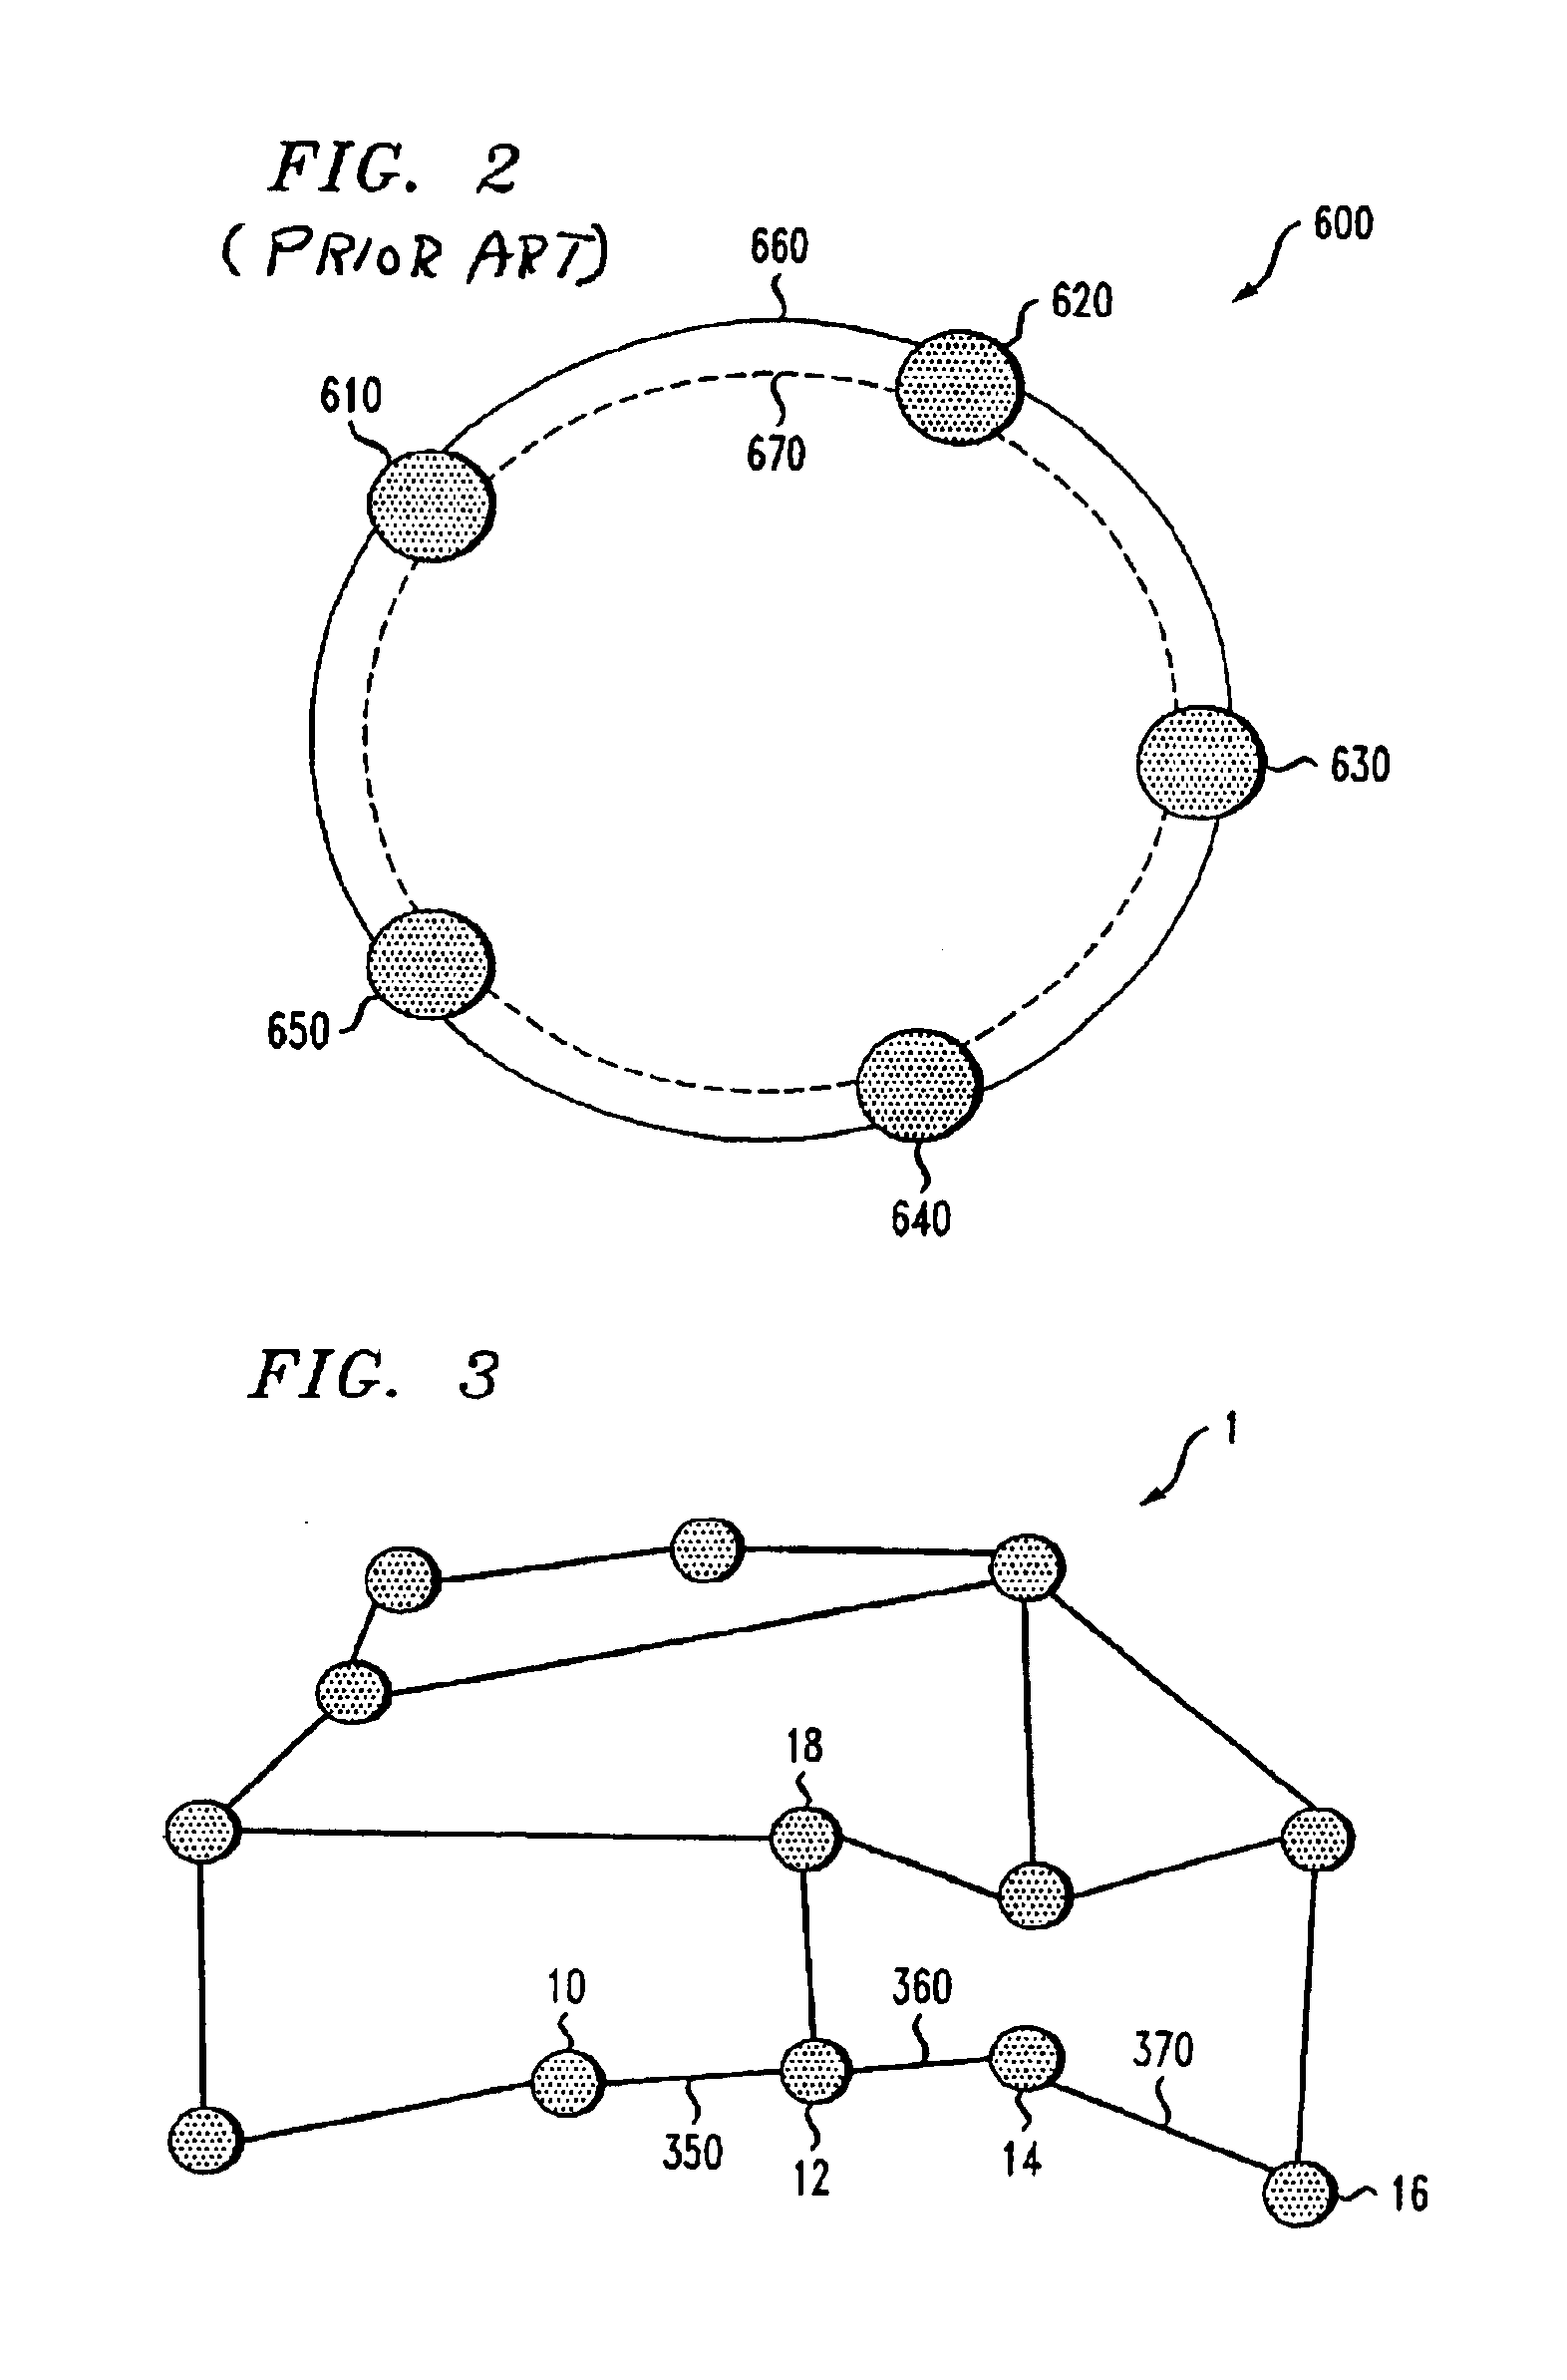 Hierarchical telecommunications network with fault recovery